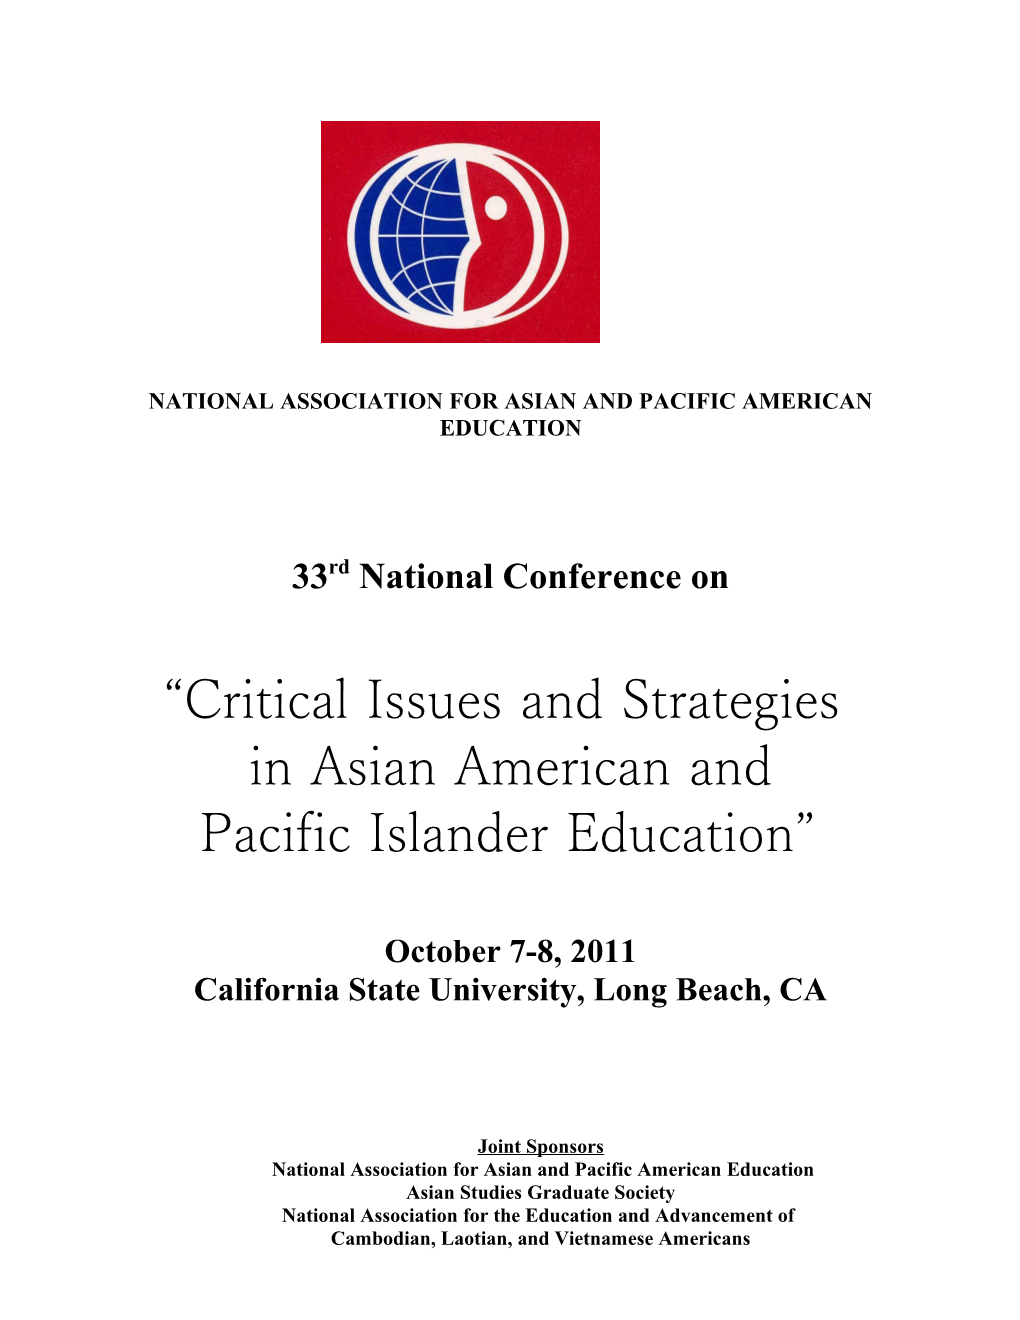 National Association for Asian and Pacific American Education